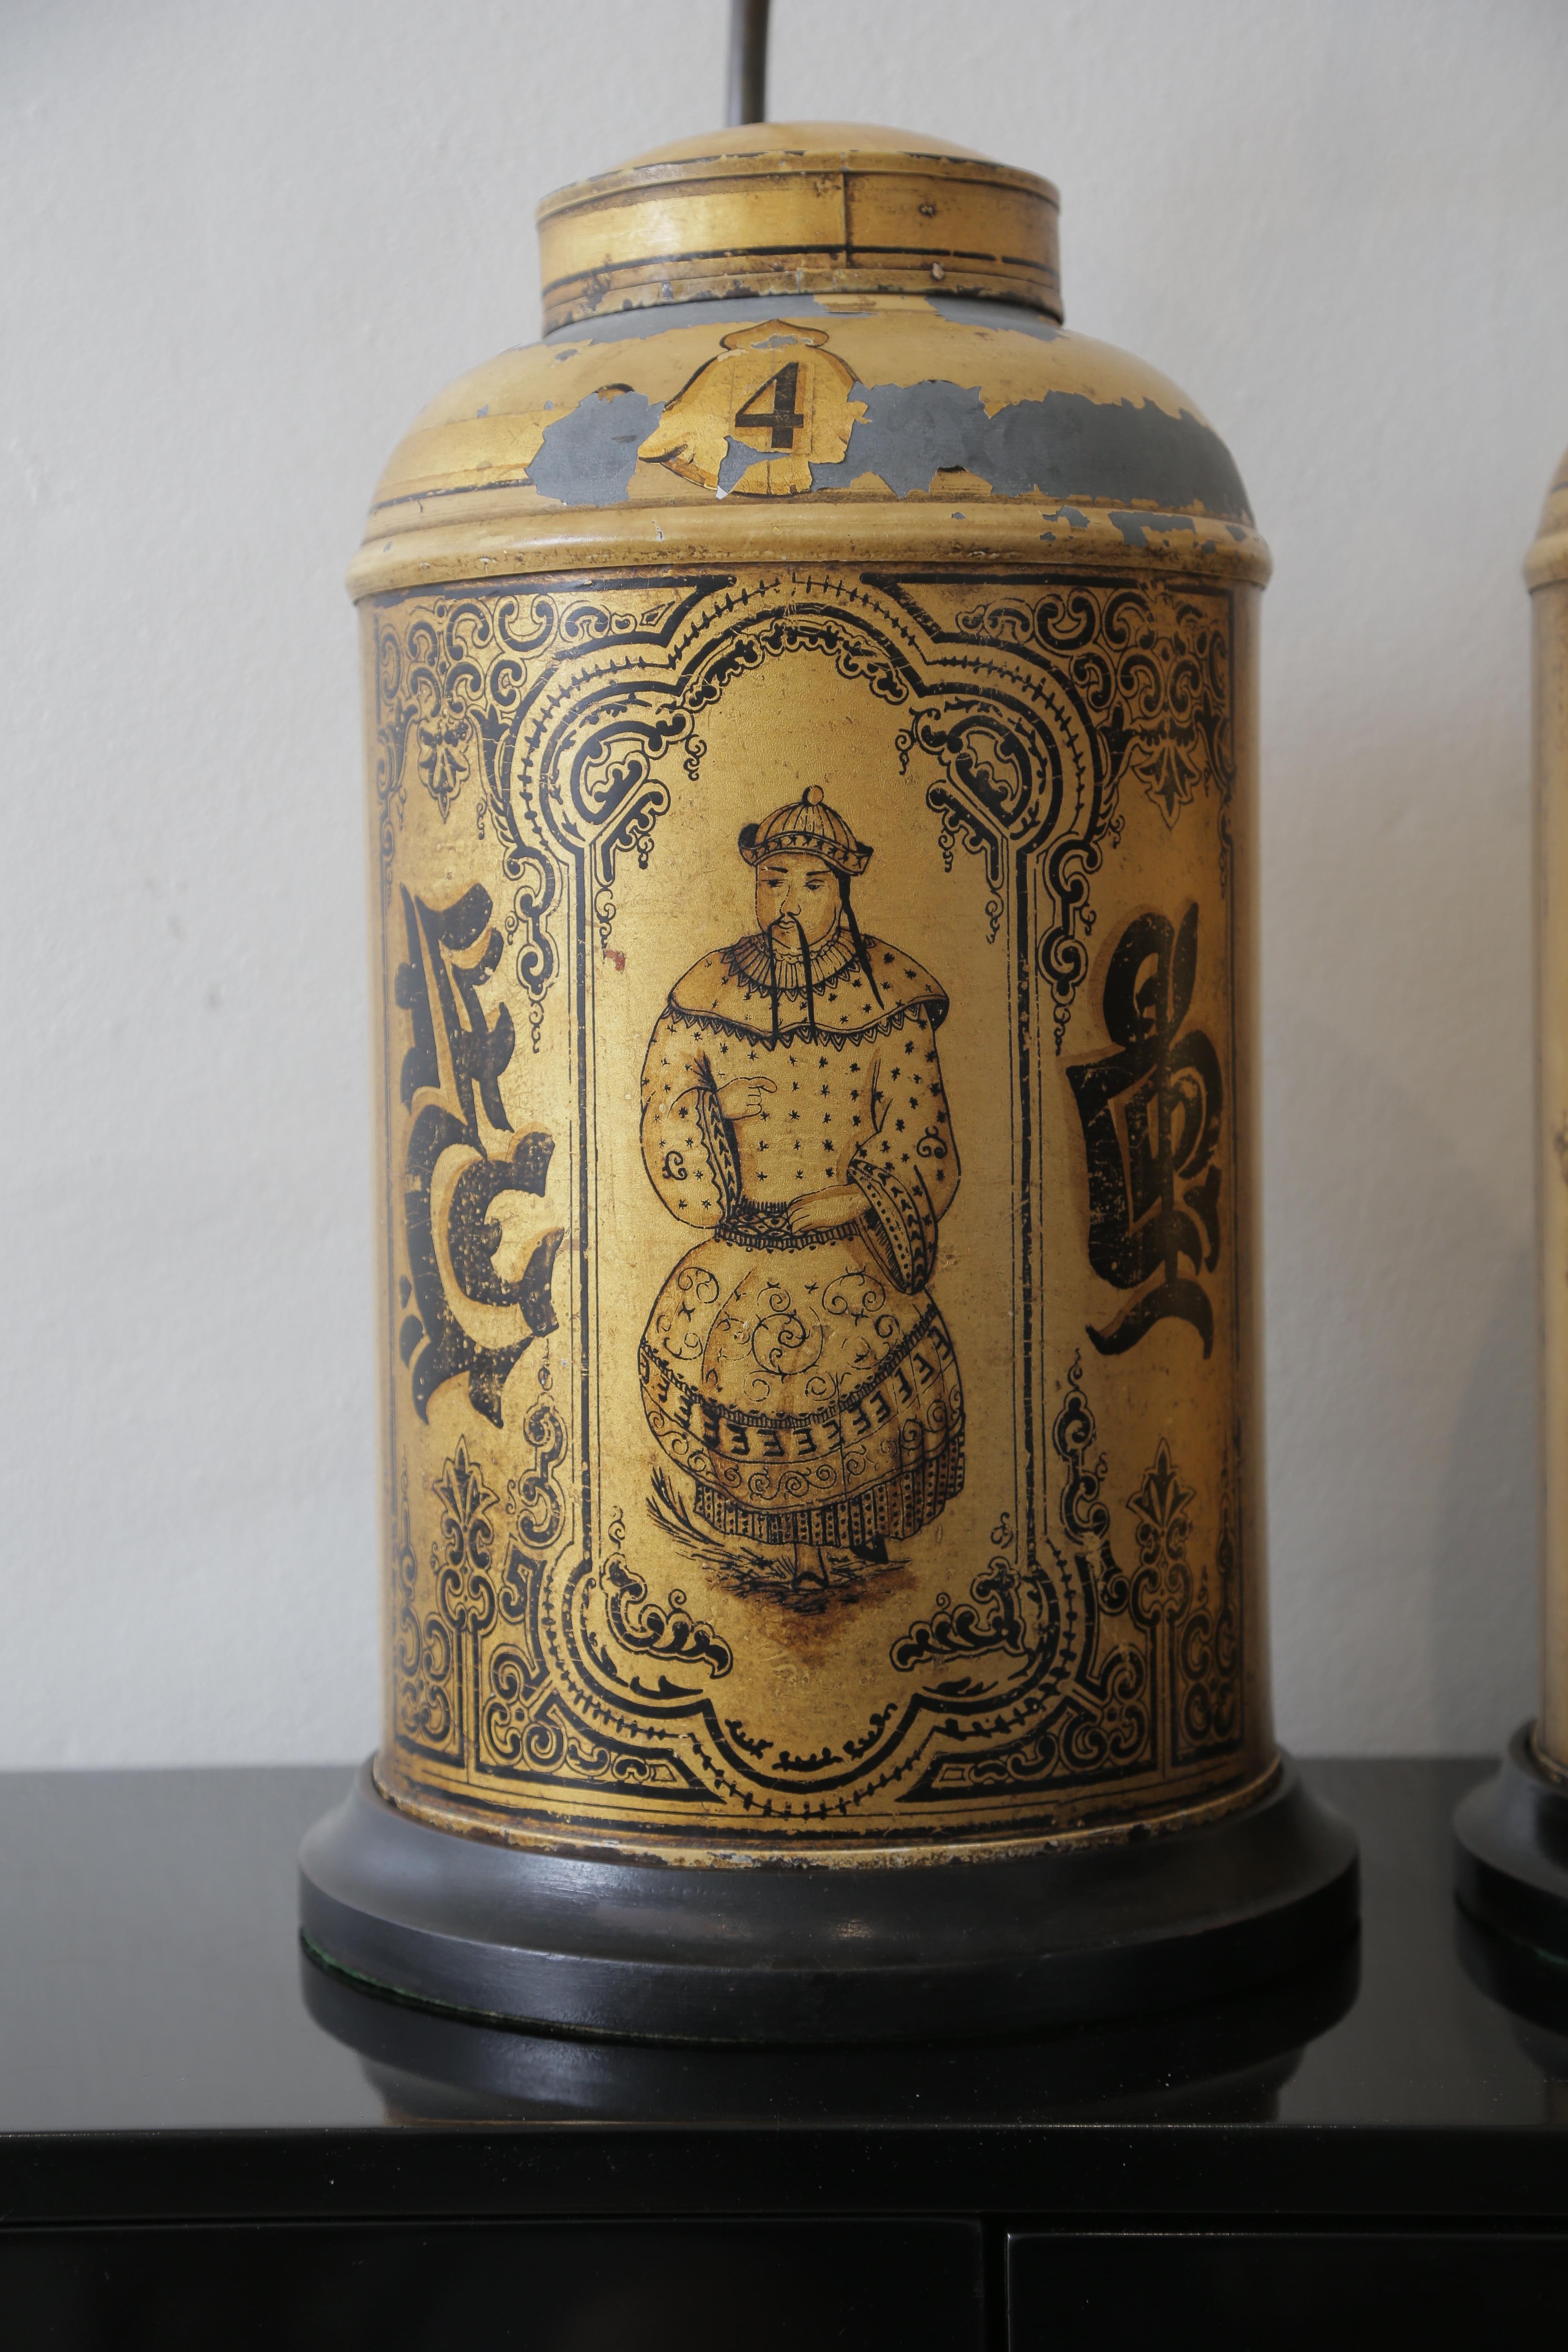 Unique pair of 19th century Chinese tea caddies base lamps with lucky numbers on them.